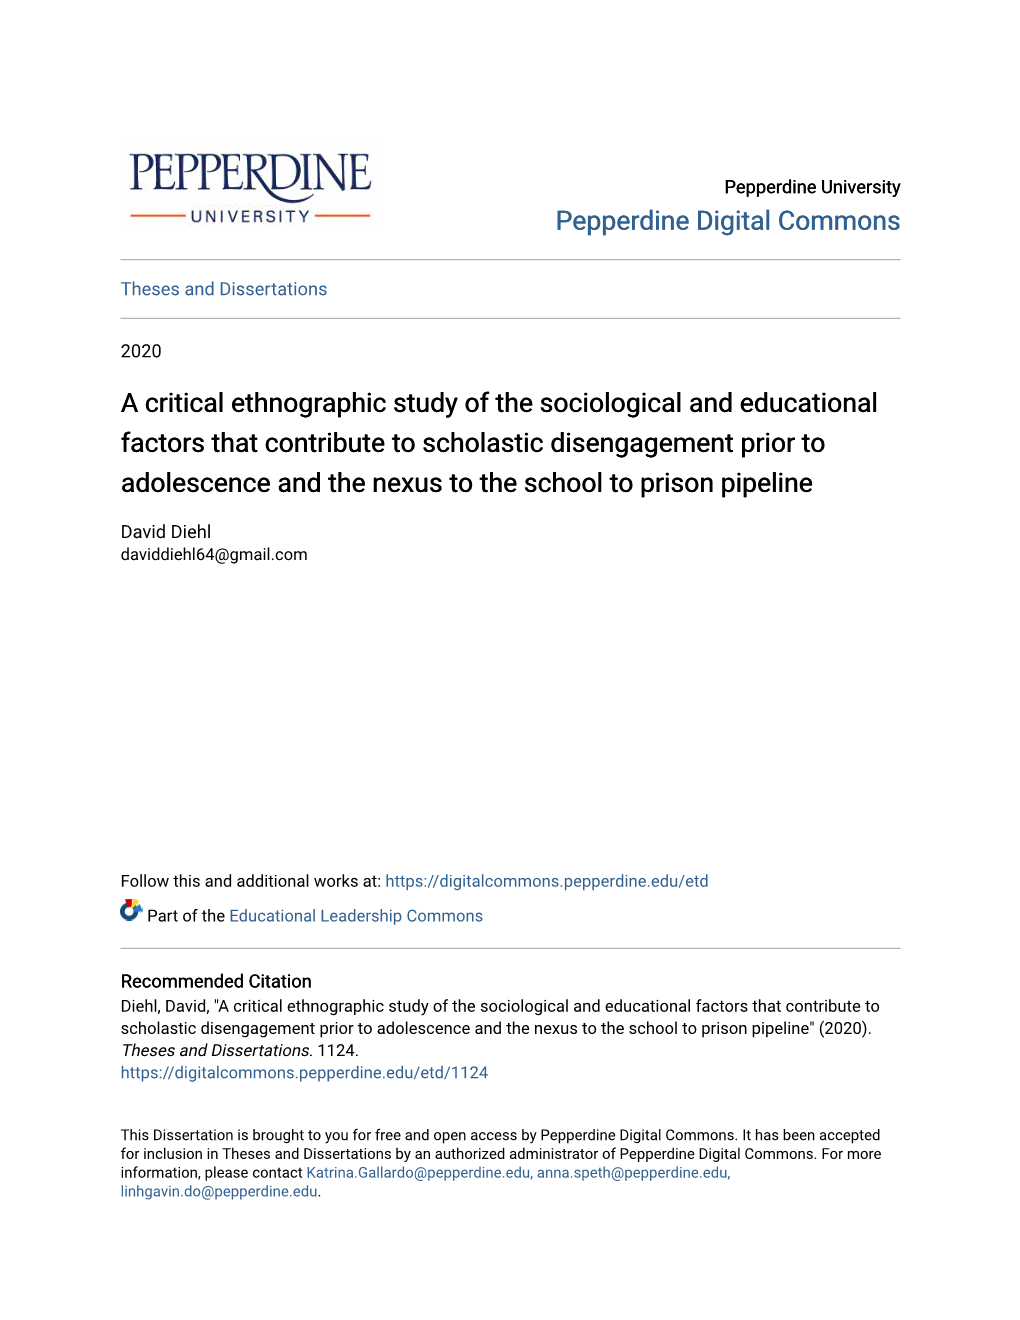 A Critical Ethnographic Study of the Sociological and Educational Factors